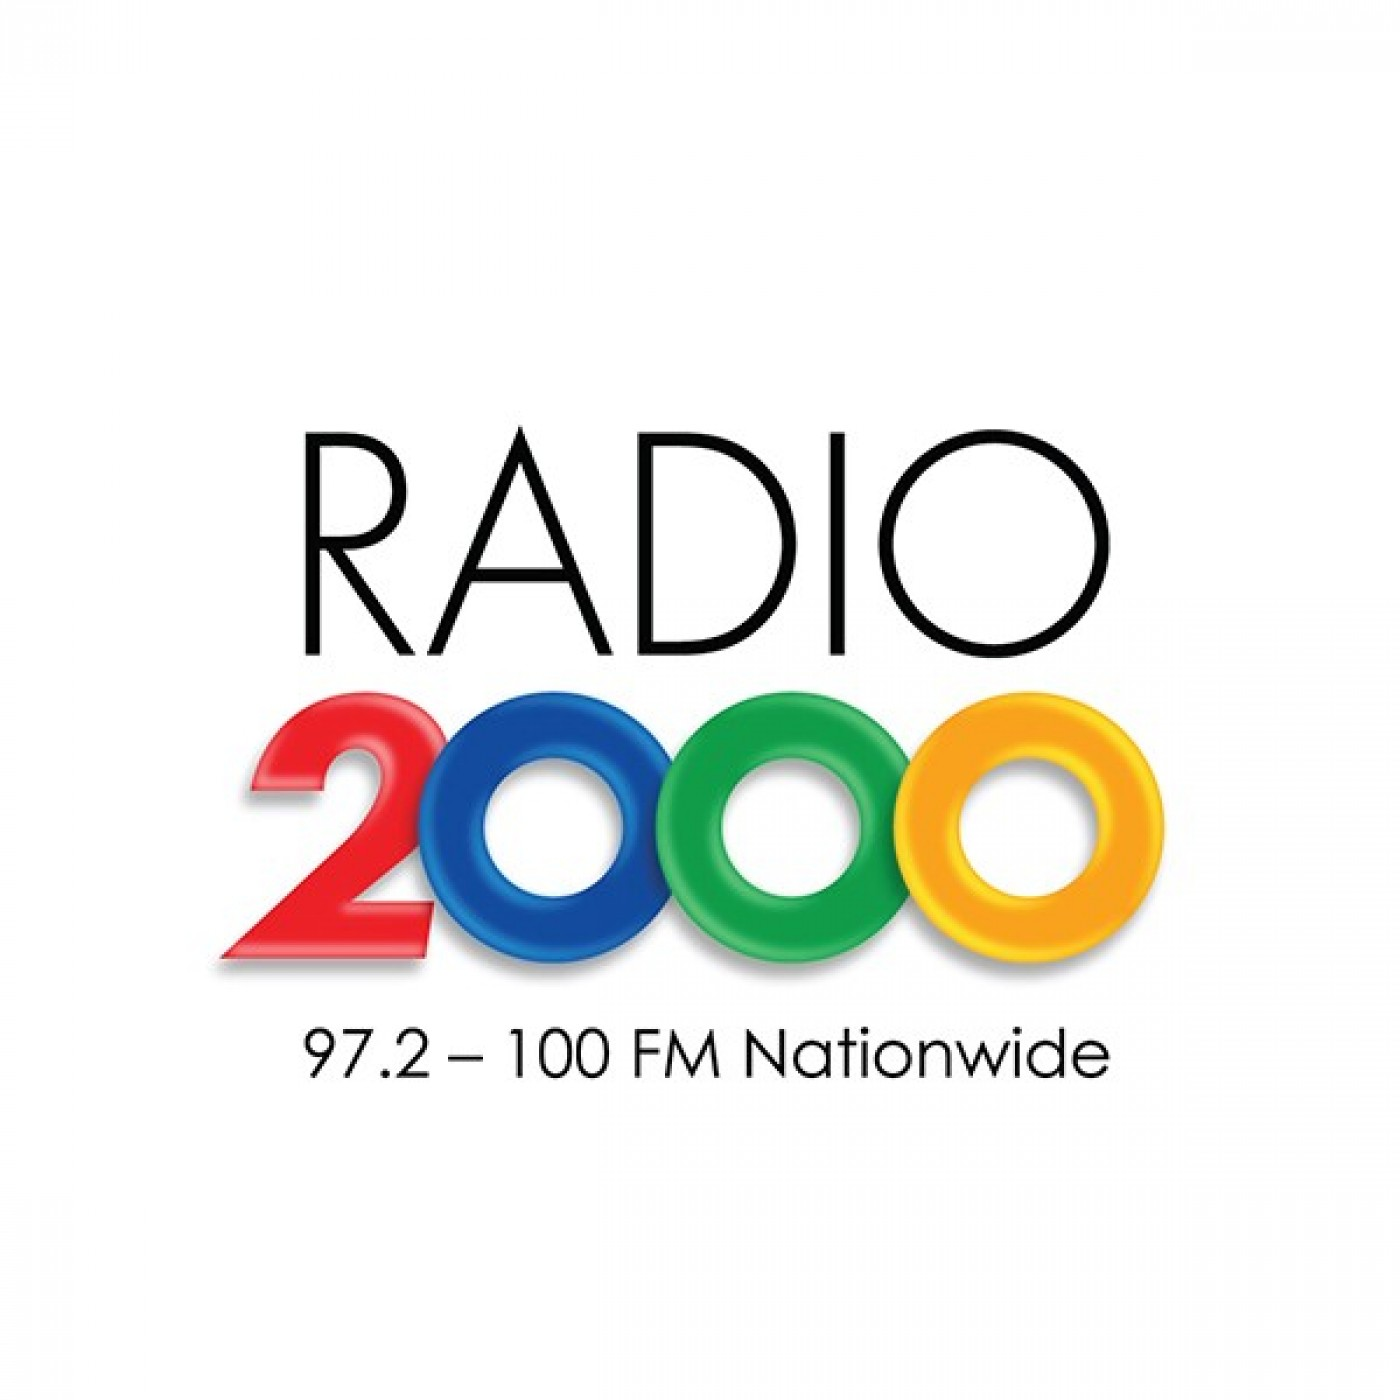 RADIO 2000 IN THE MIX DEEP HOUSE MIX BY DARKHORSE 01-05-2020 22H20-22H40